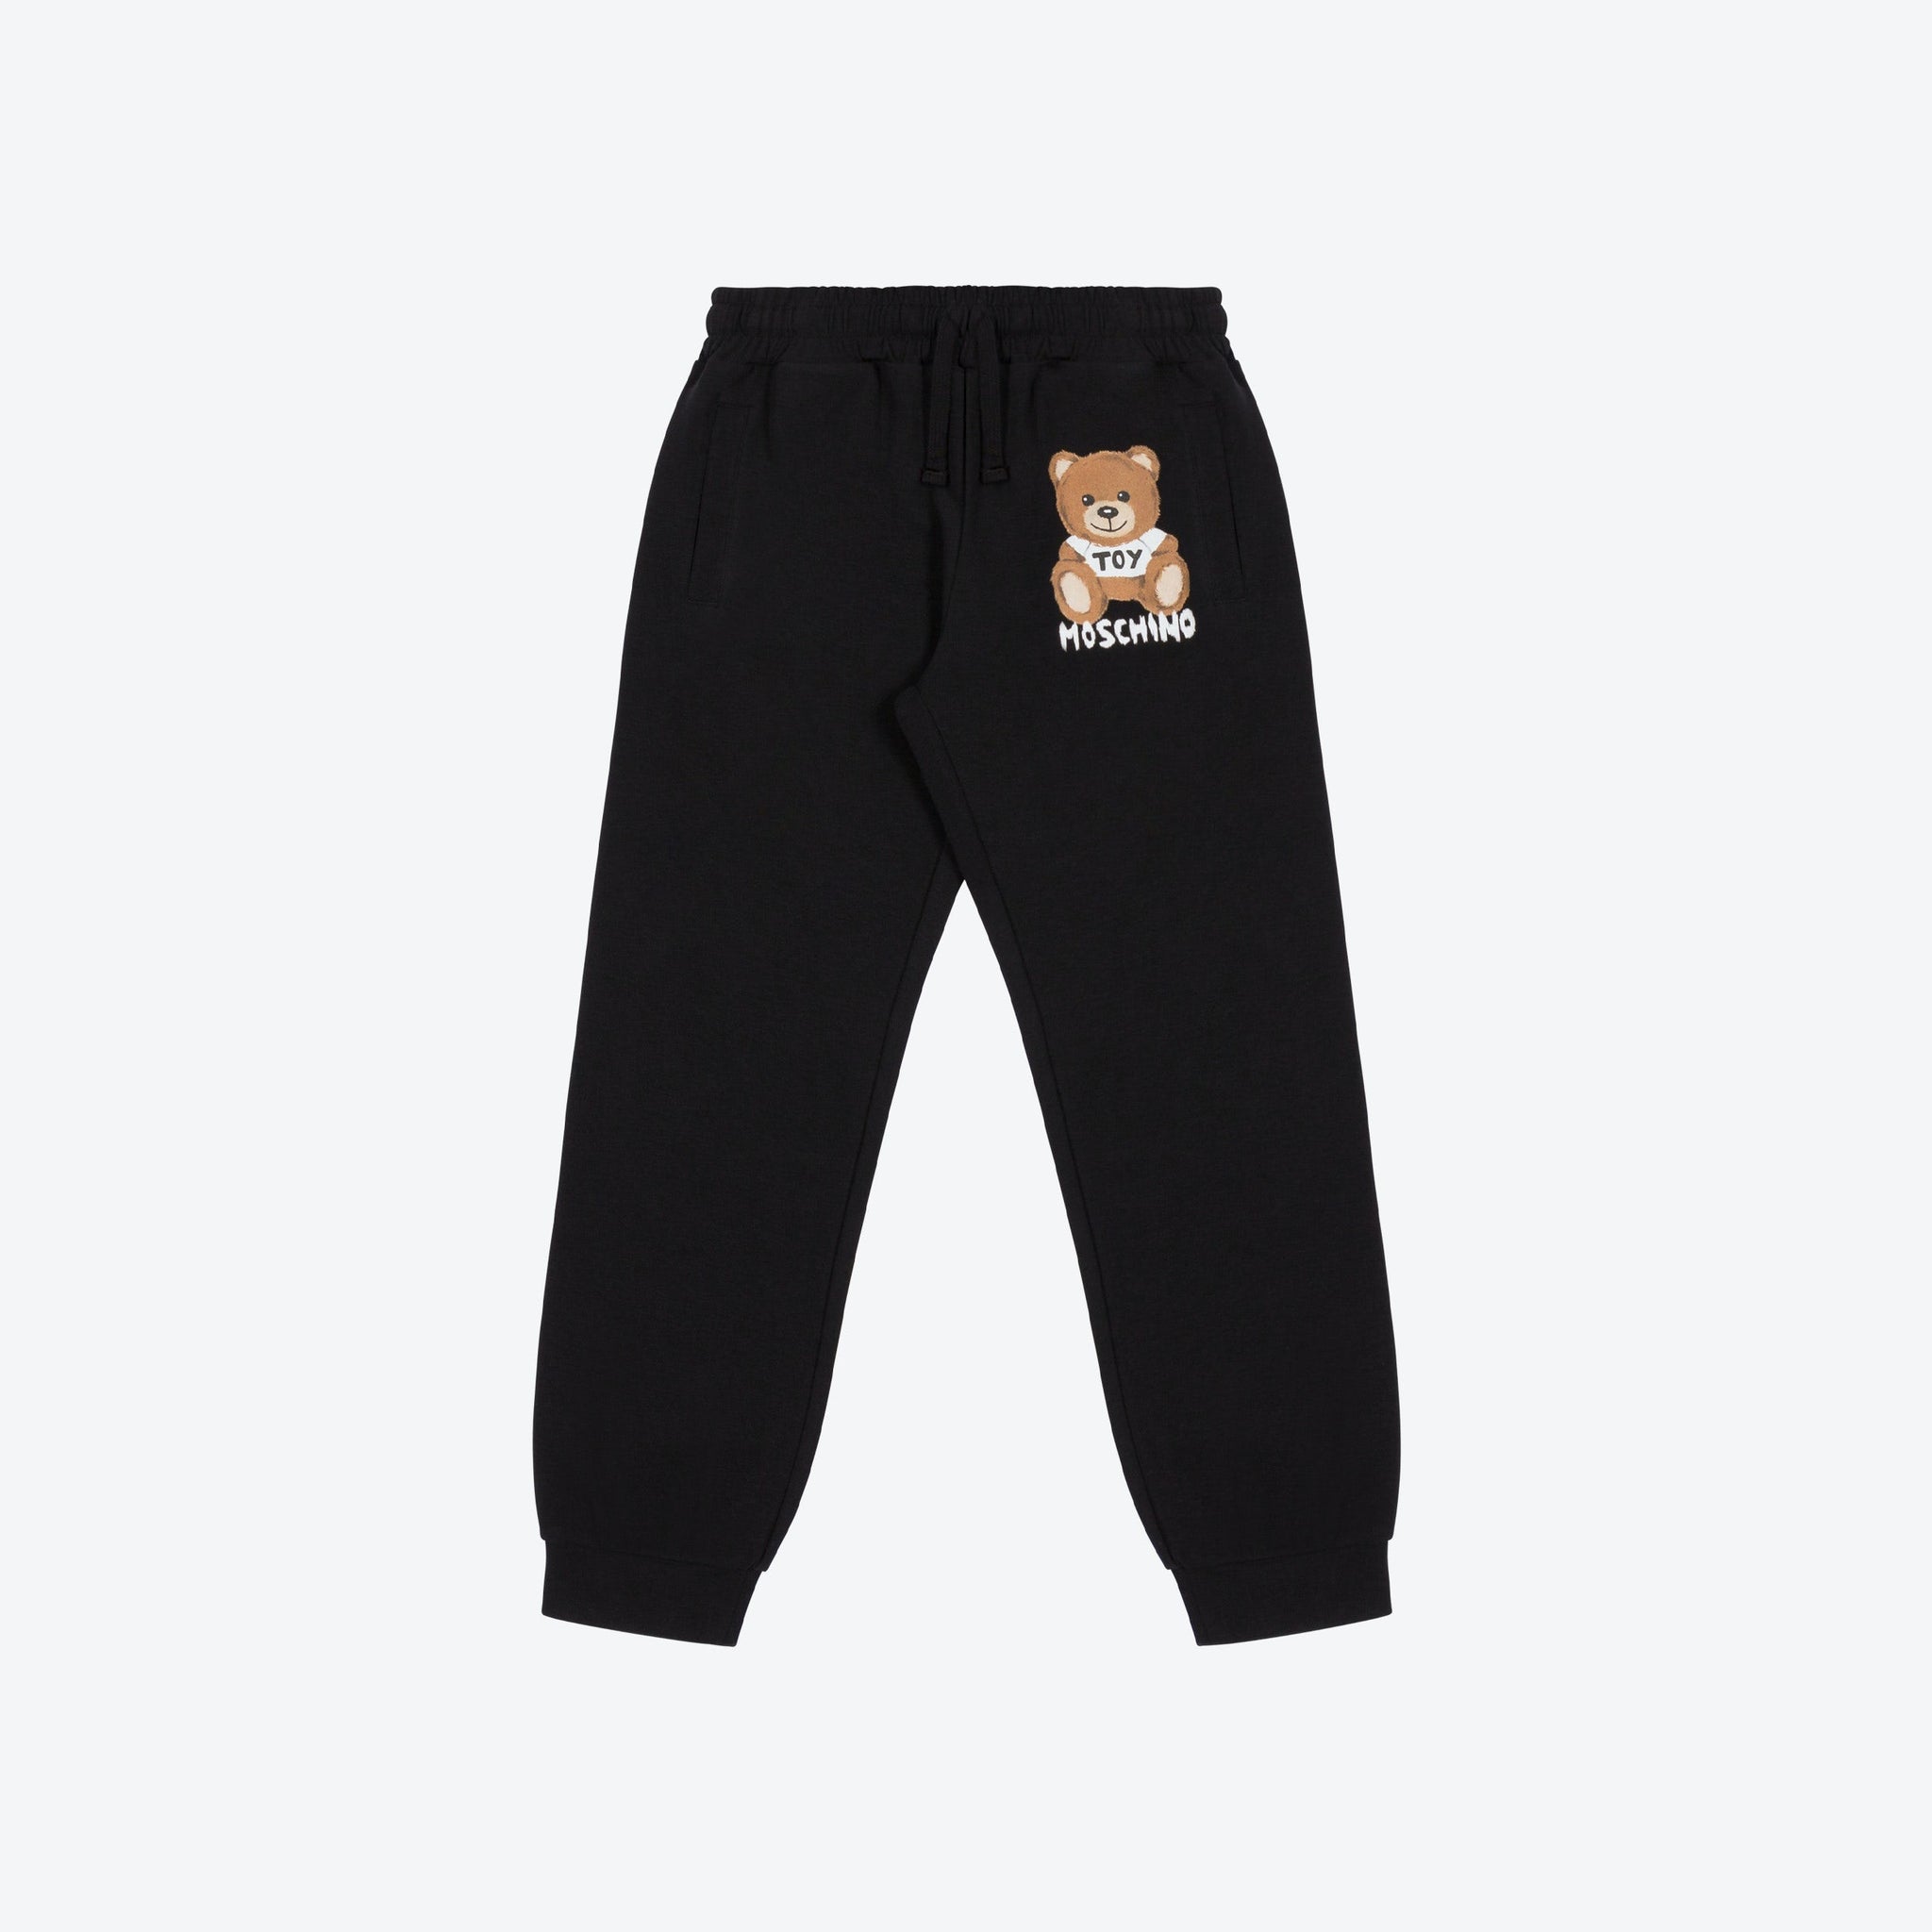 SWEATPANTS WITH TOY BEAR GRAPHIC - BLACK